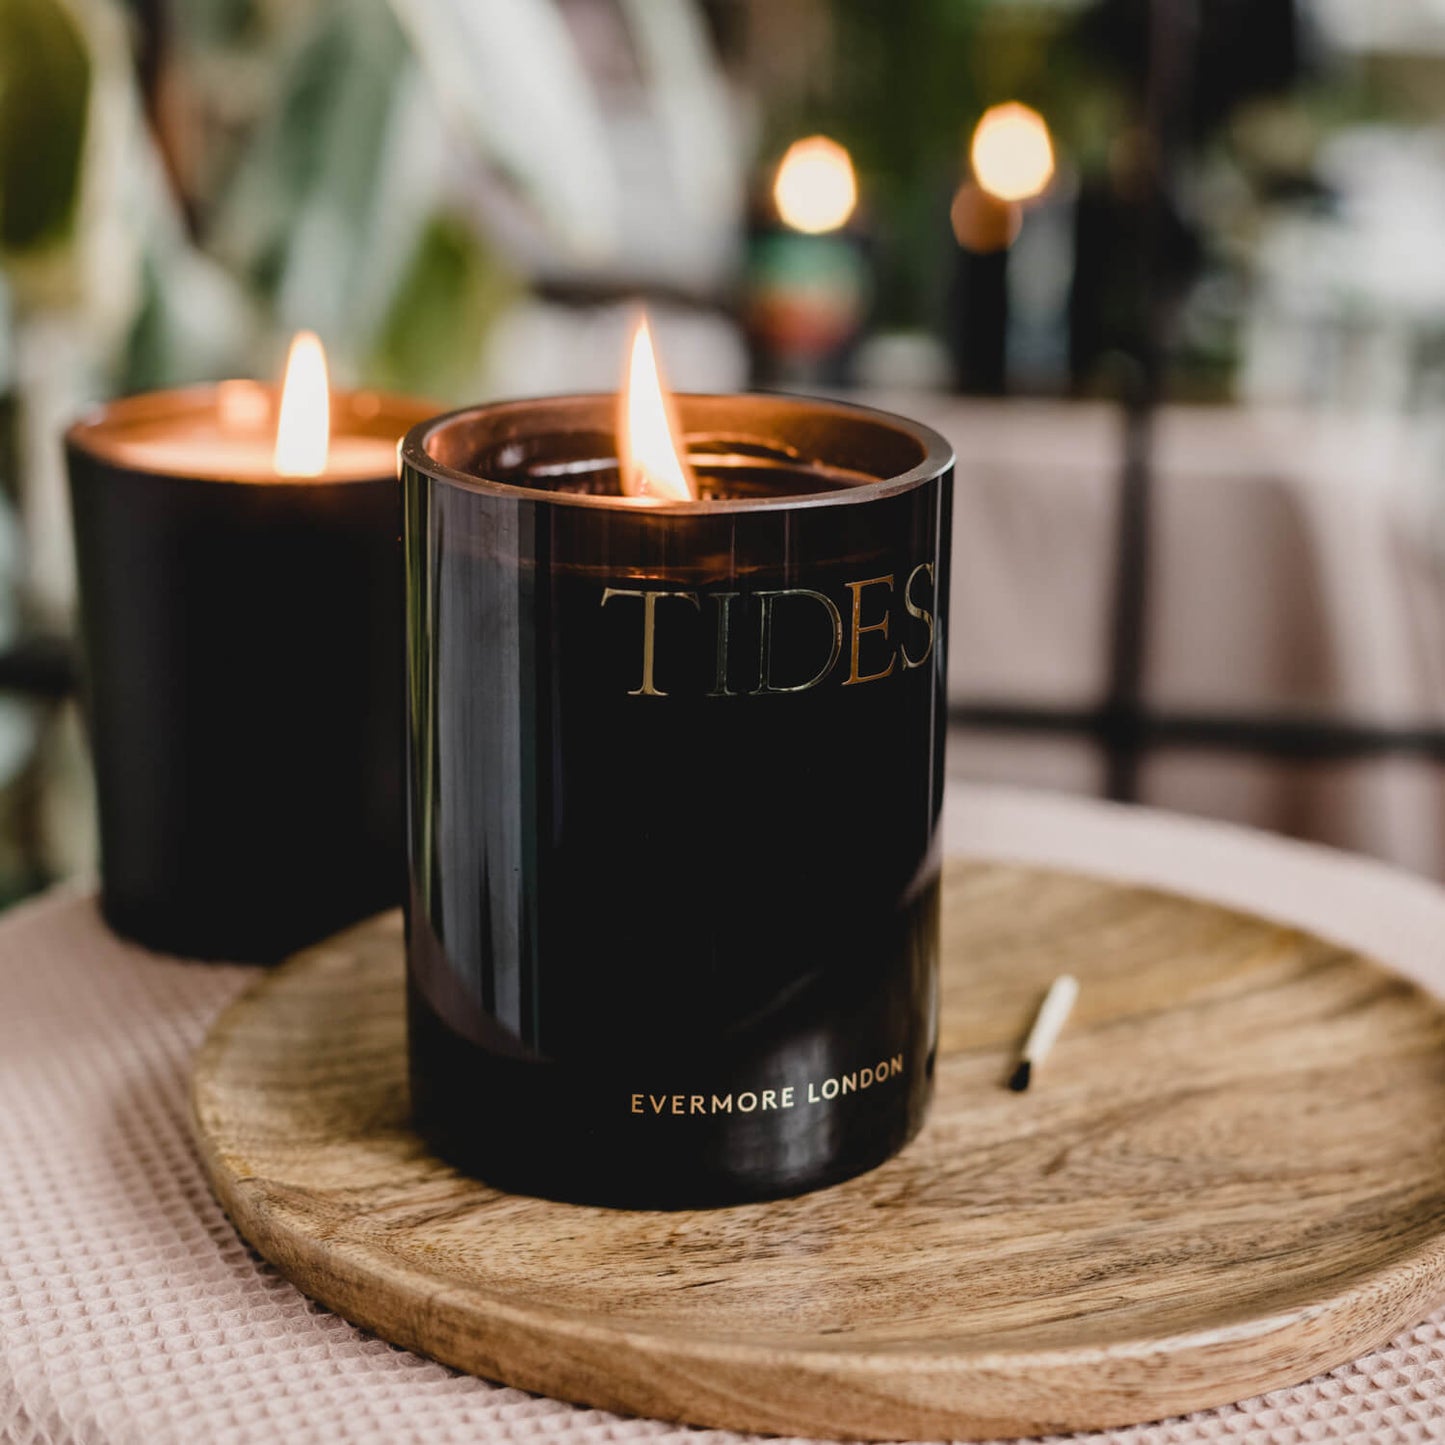 Evermore Tides Scented Candle - Osmology Scented Candles & Home Fragrance